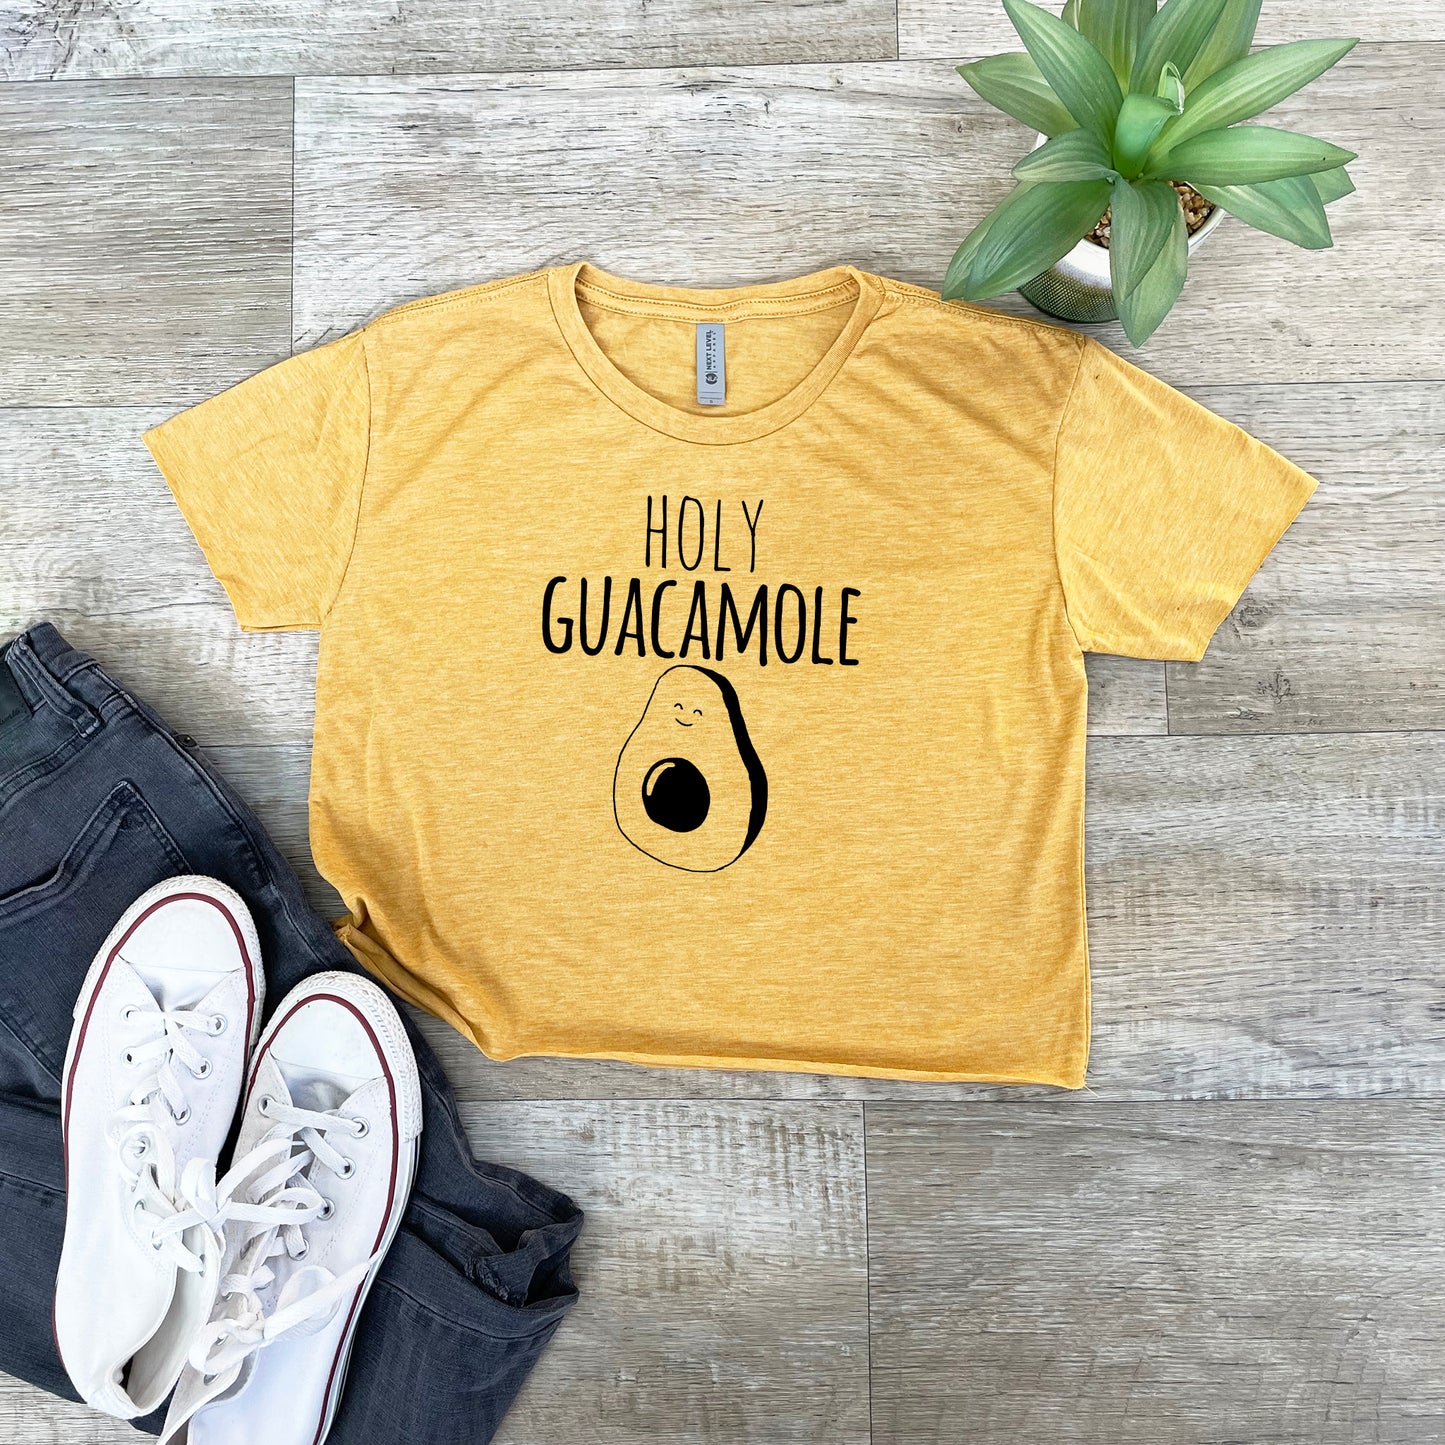 Holy Guacamole - Women's Crop Tee - Heather Gray or Gold